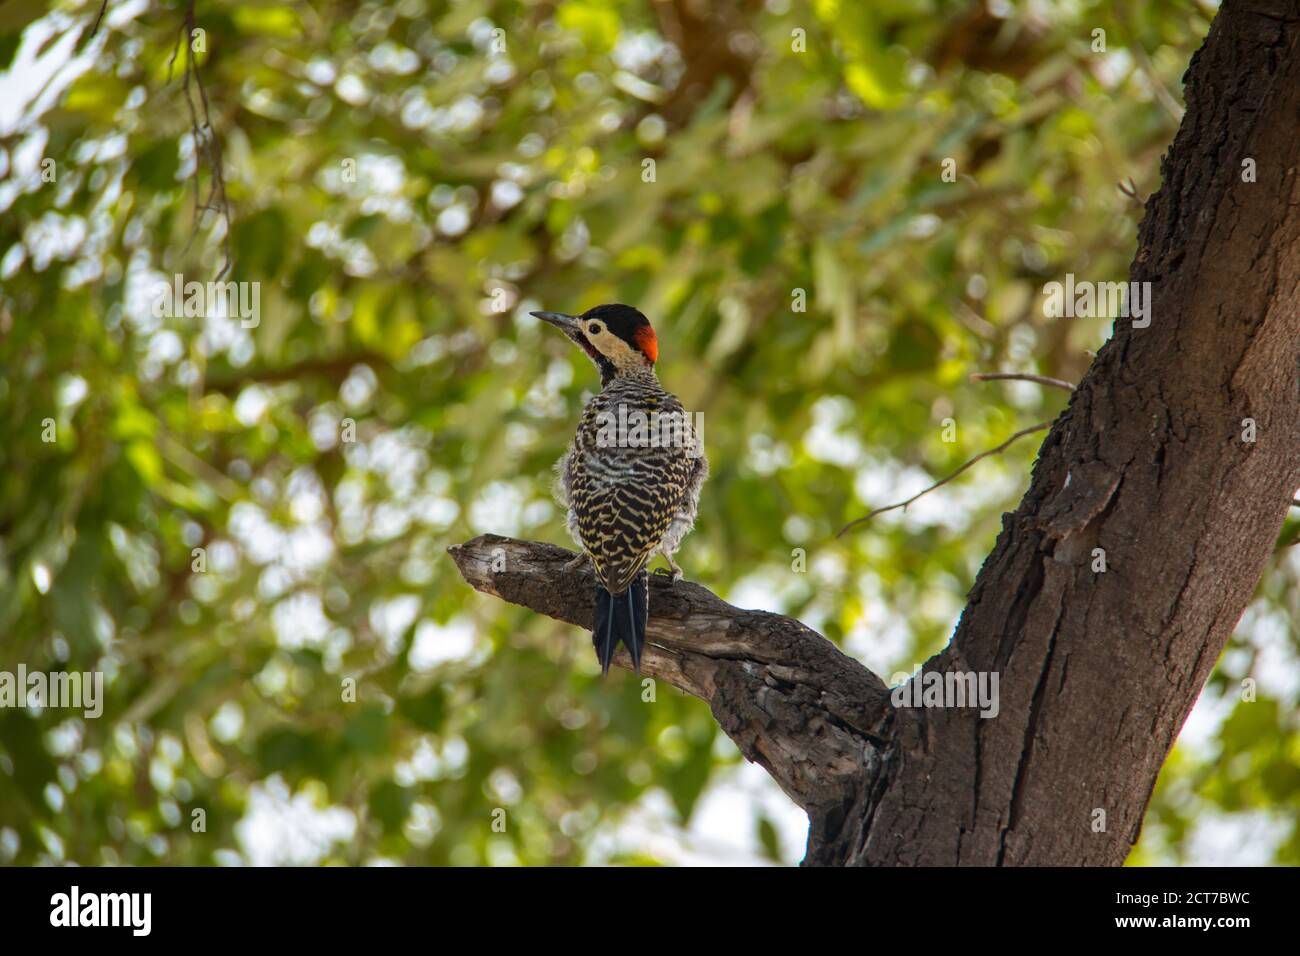 Green-barred woodpecker perched on a tree branch Stock Photo